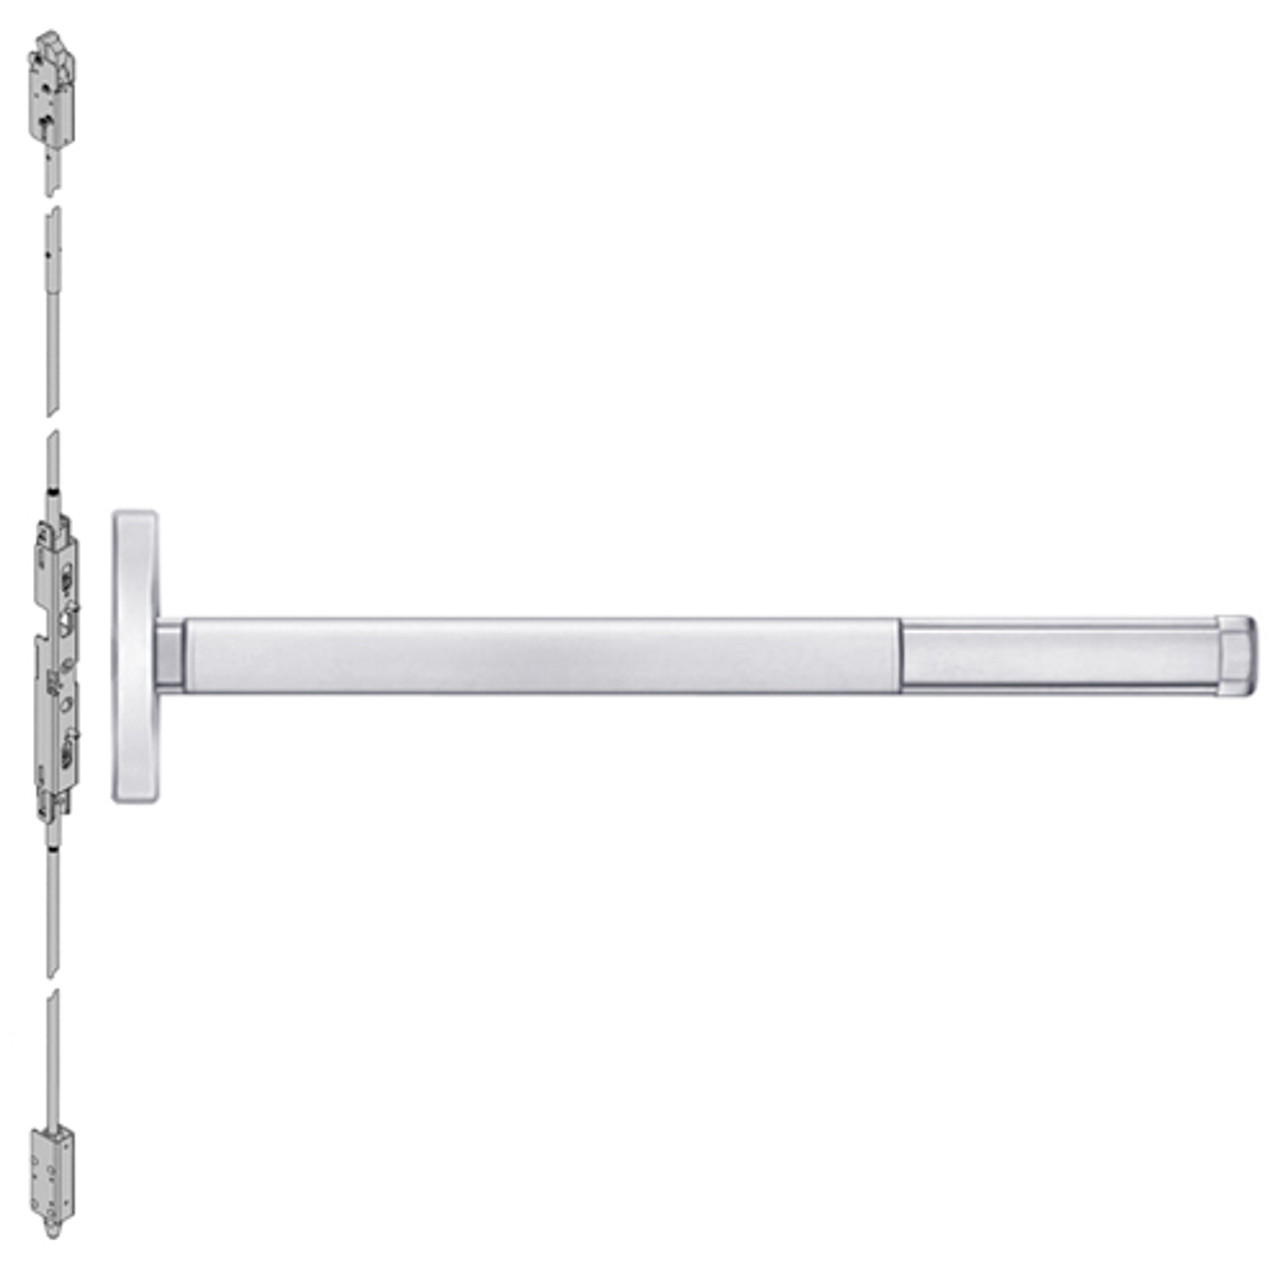 ELRFL2601-625-48 PHI 2600 Series Fire Rated Concealed Vertical Rod Exit Device with Electric Latch Retraction Prepped for Cover Plate in Bright Chrome Finish